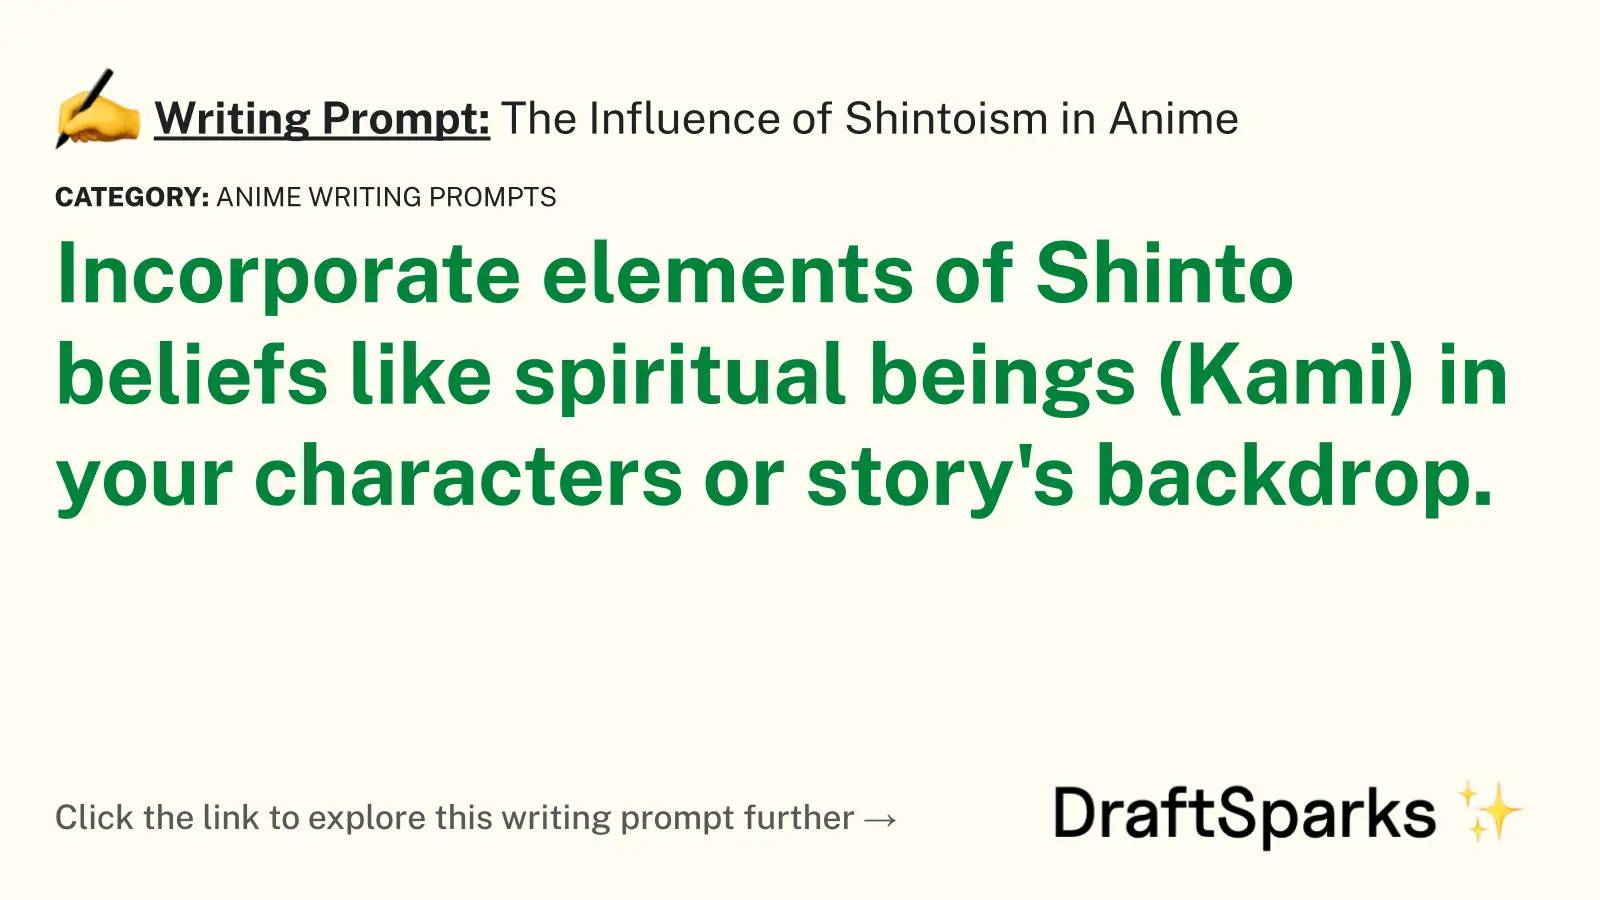 The Influence of Shintoism in Anime